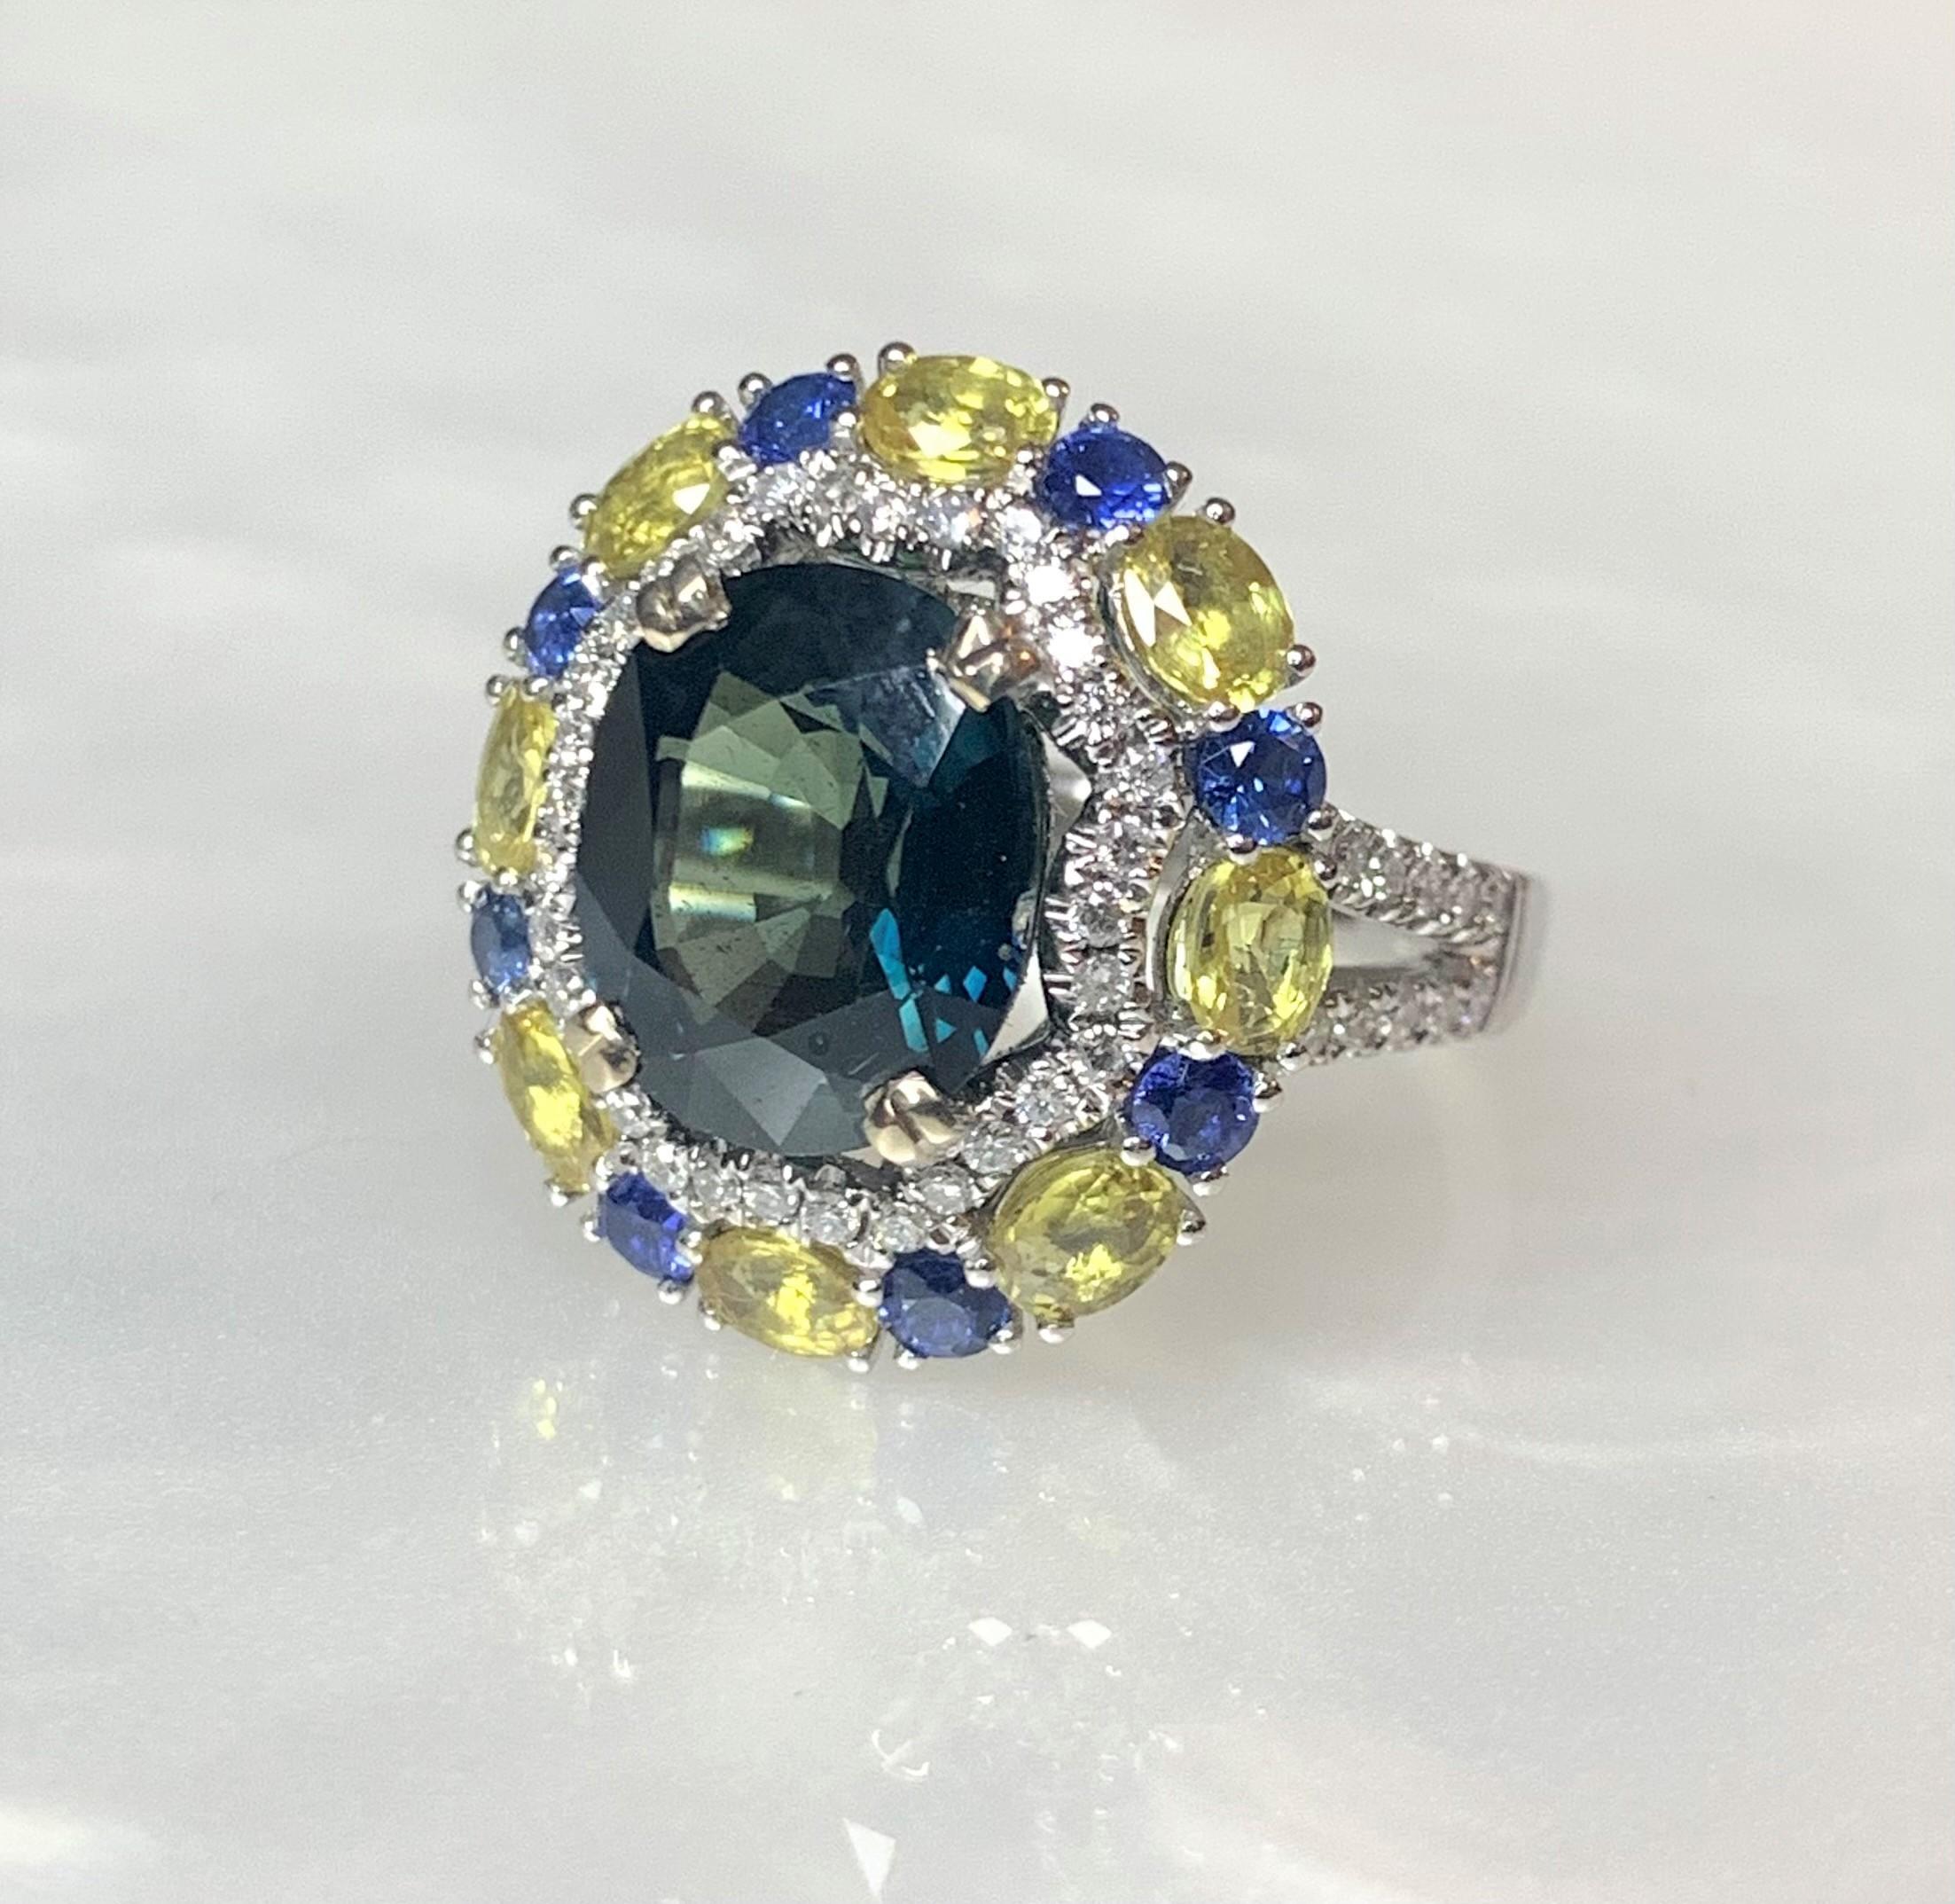 An outstanding and luxurious blue sapphire ring with a cushion cut center stone weighing 4.94 carats surrounded by a scalloped edge halo of sparkling white diamonds weighing 0.43 carats hugged by contrasting alternating yellow sapphires weighing